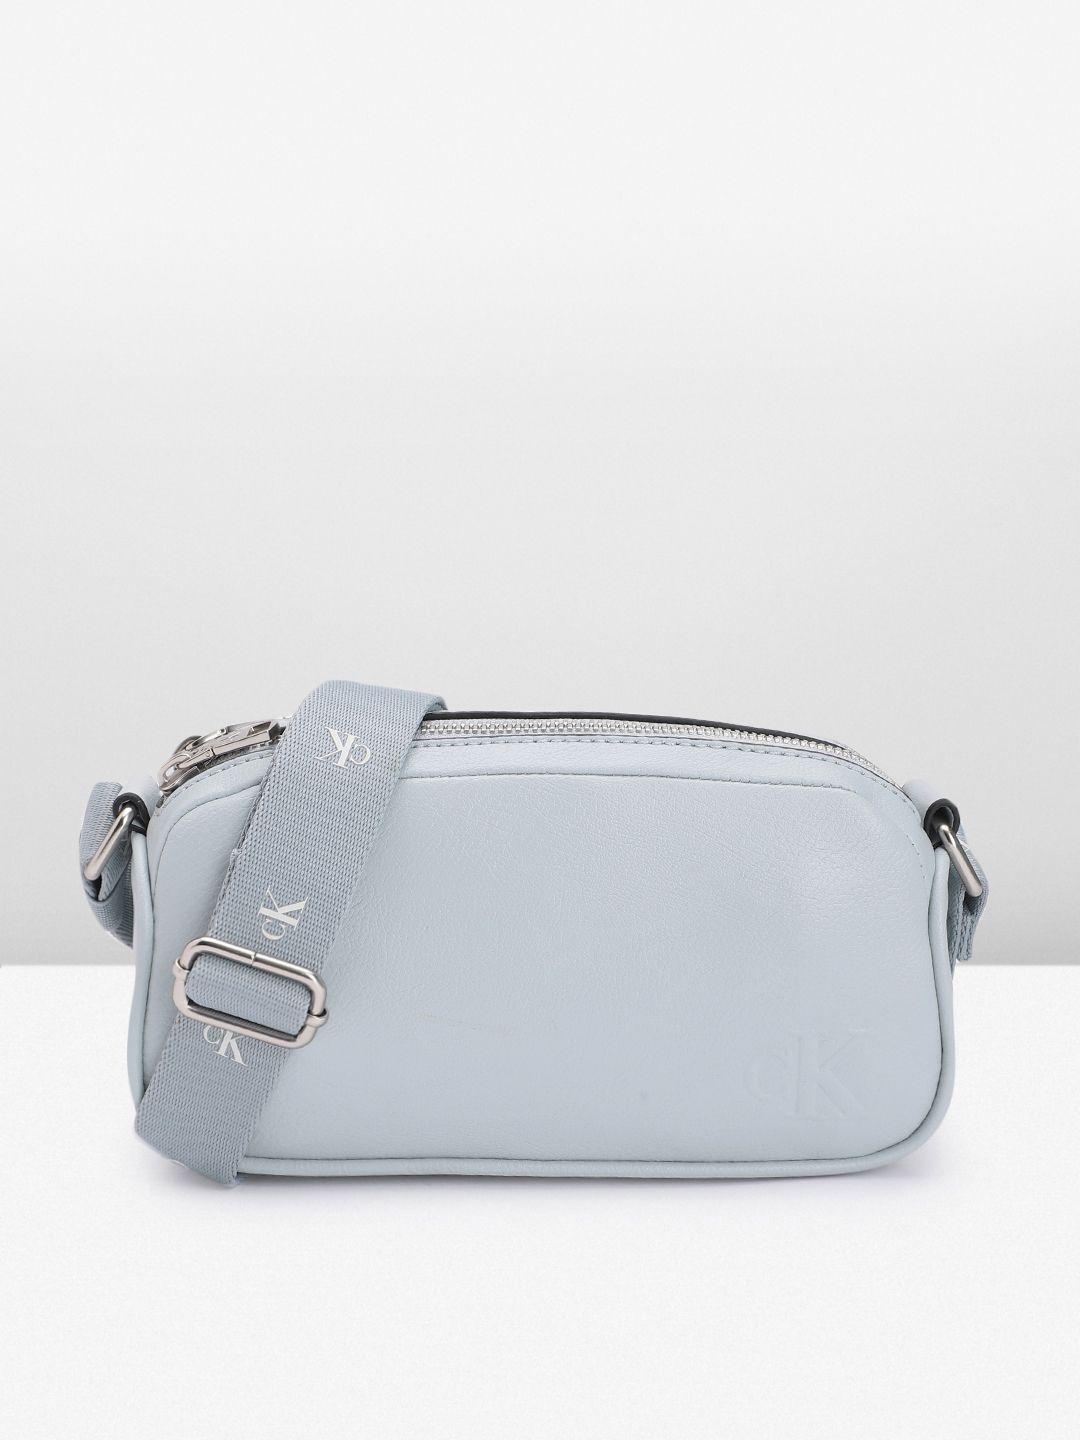 calvin klein solid structured ultralight sling bag with minimal brand logo embossed detail